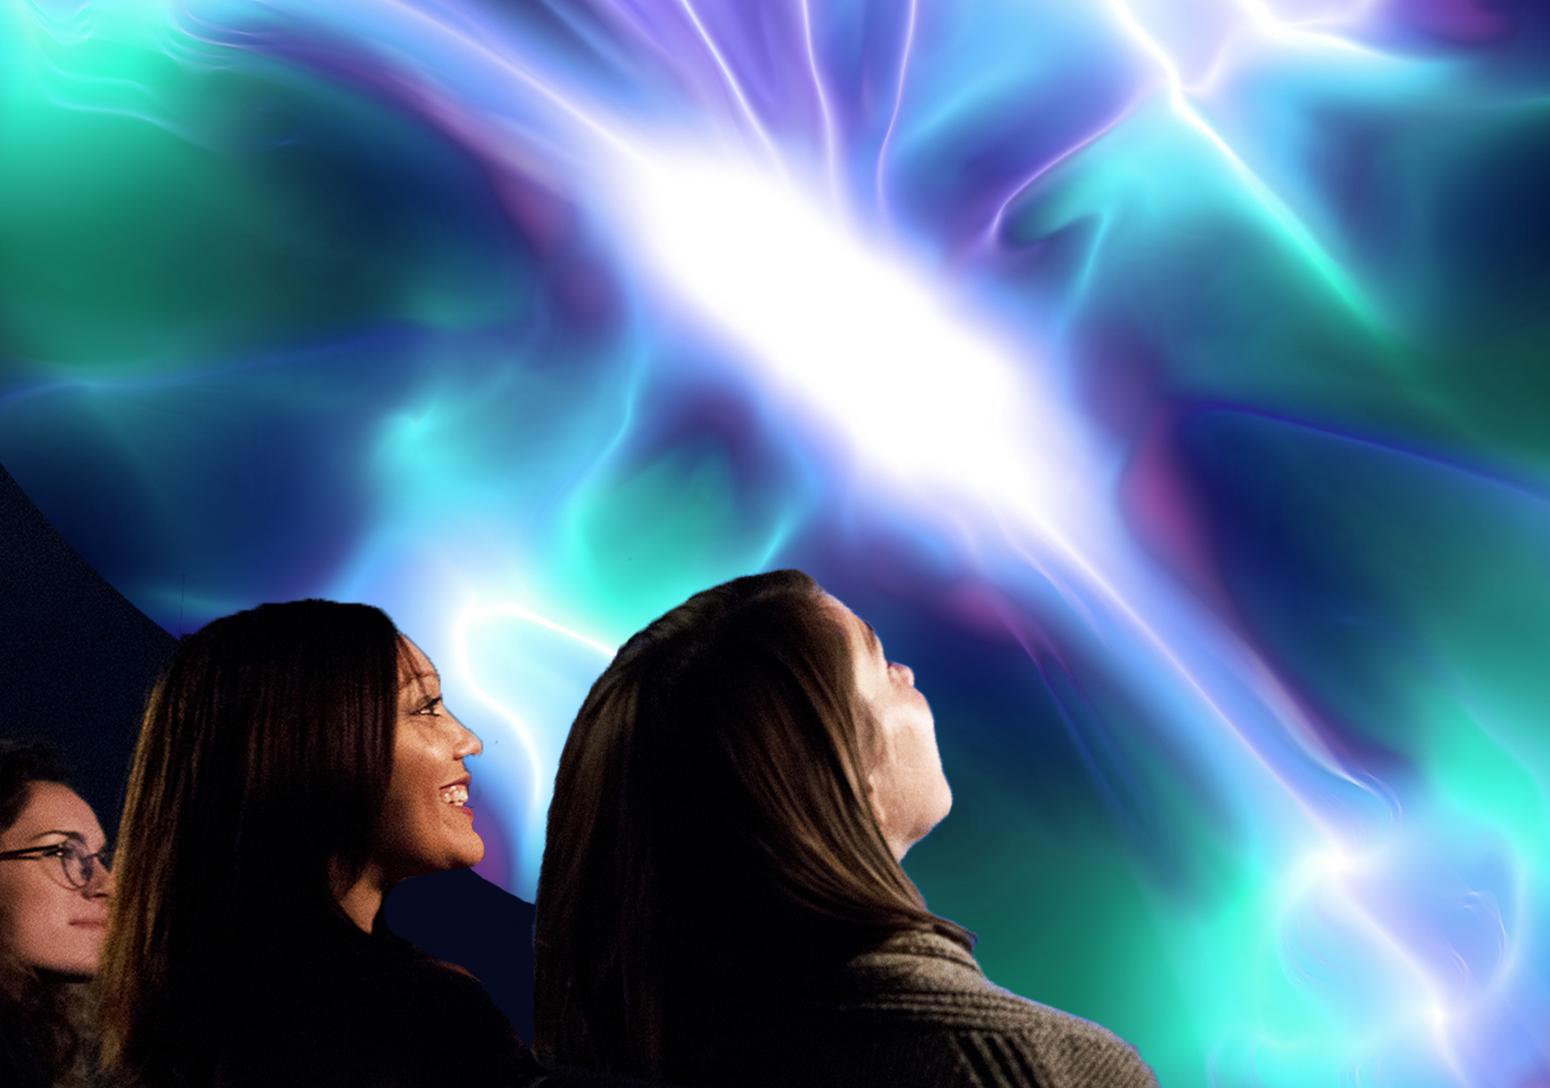 Close up of the profiles of 3 women as the look up at the planetarium dome which displays colorful lights and lasers.